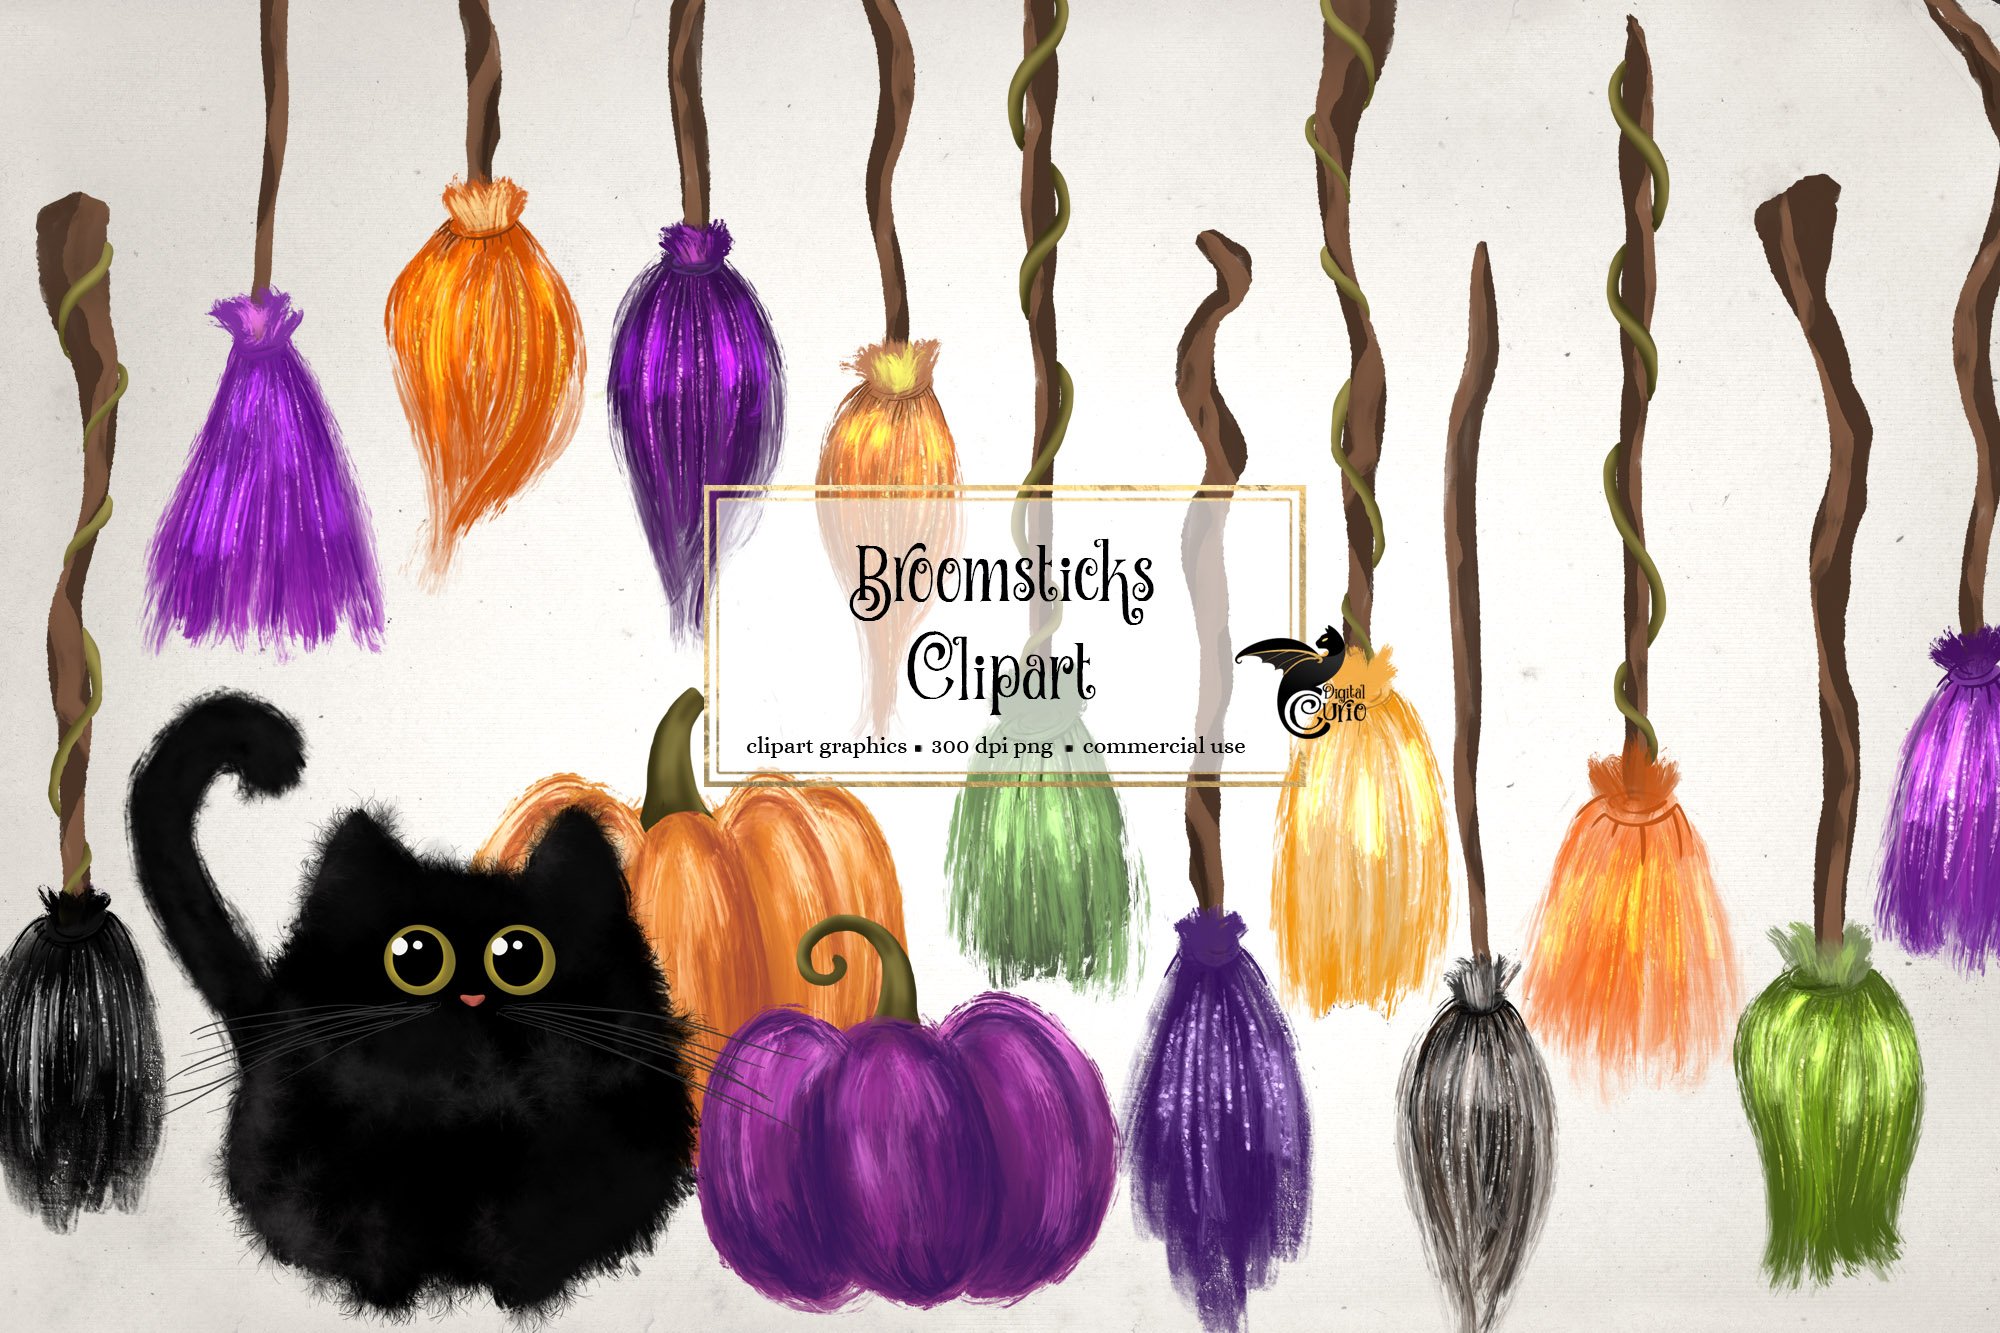 Broomstick Clipart cover image.